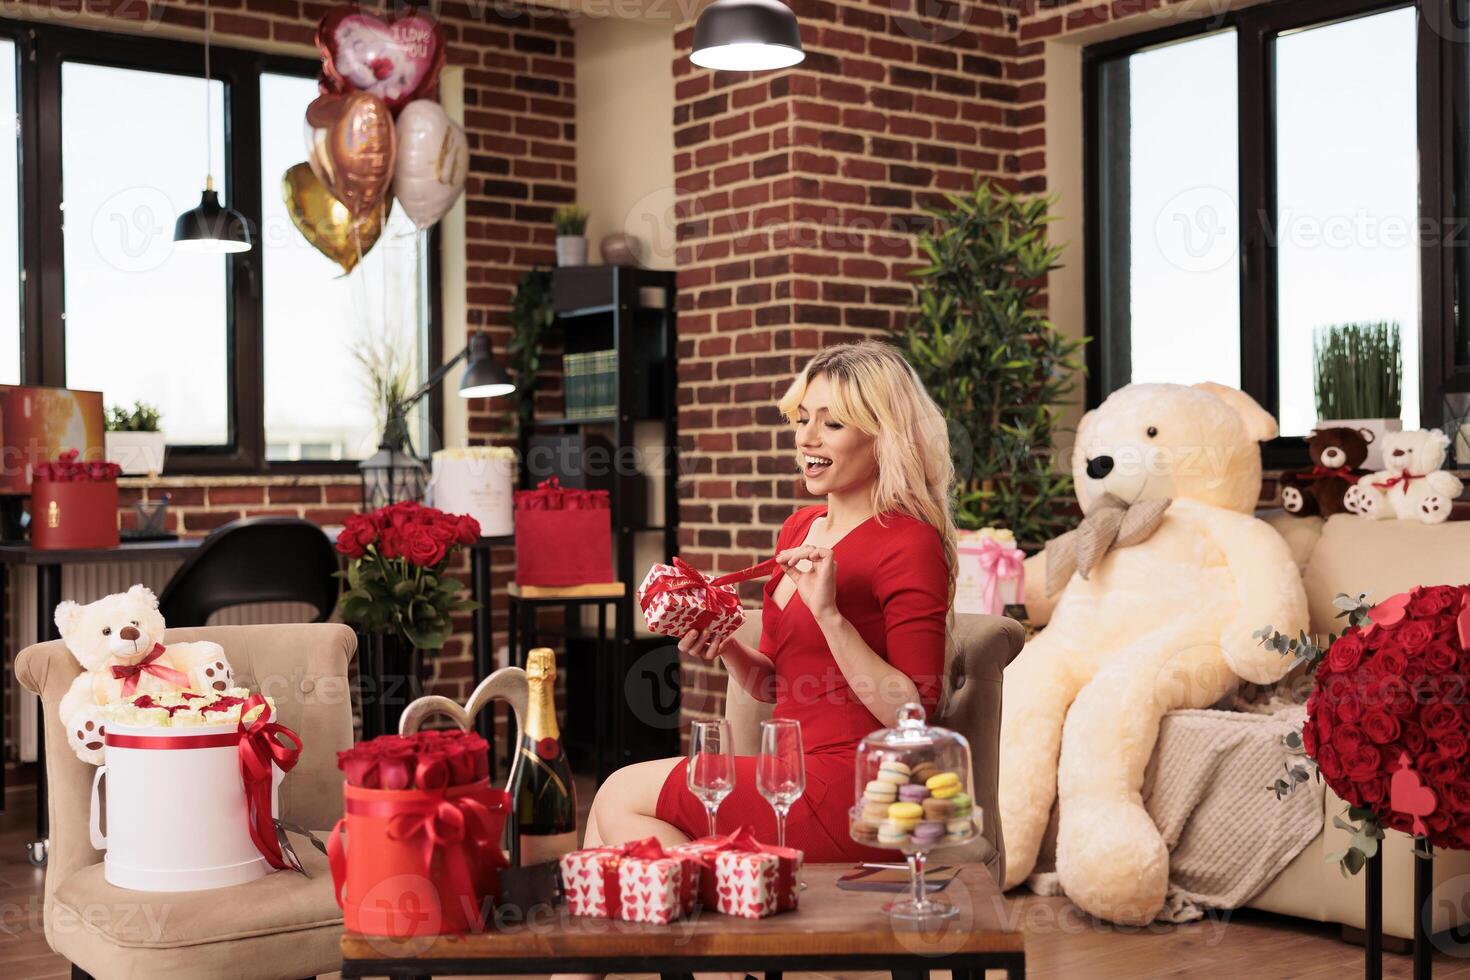 Cute girlfriend sitting in living room filled with romantic gift, enjoying celebrating love holiday. Attractive sexy woman in red dress receiving valentine s day presents from boyfriend photo